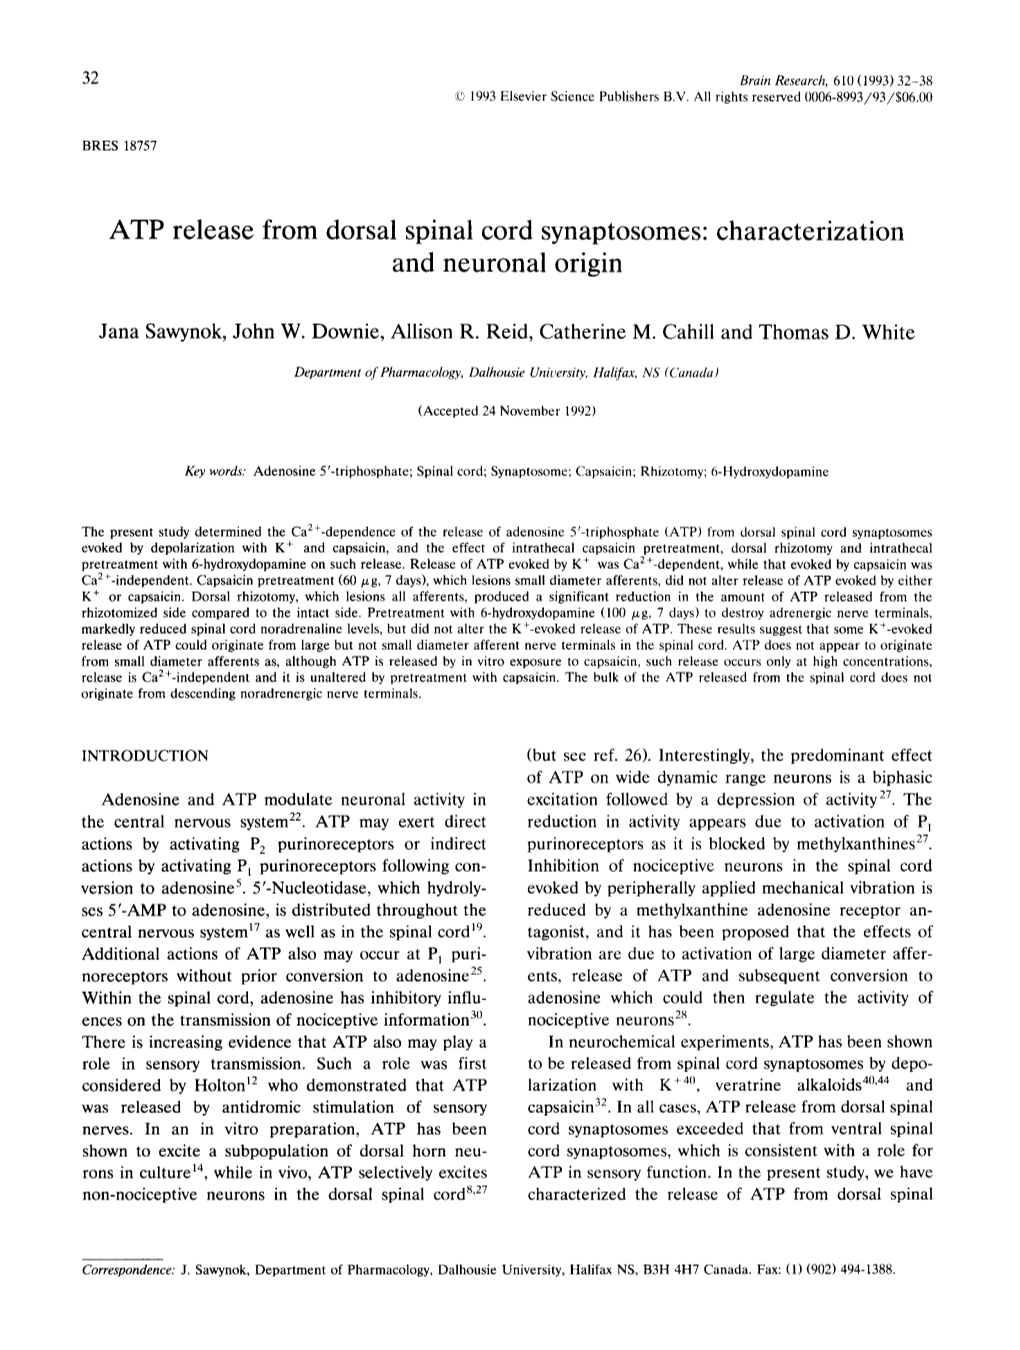 ATP Release from Dorsal Spinal Cord Synaptosomes: Characterization and Neuronal Origin